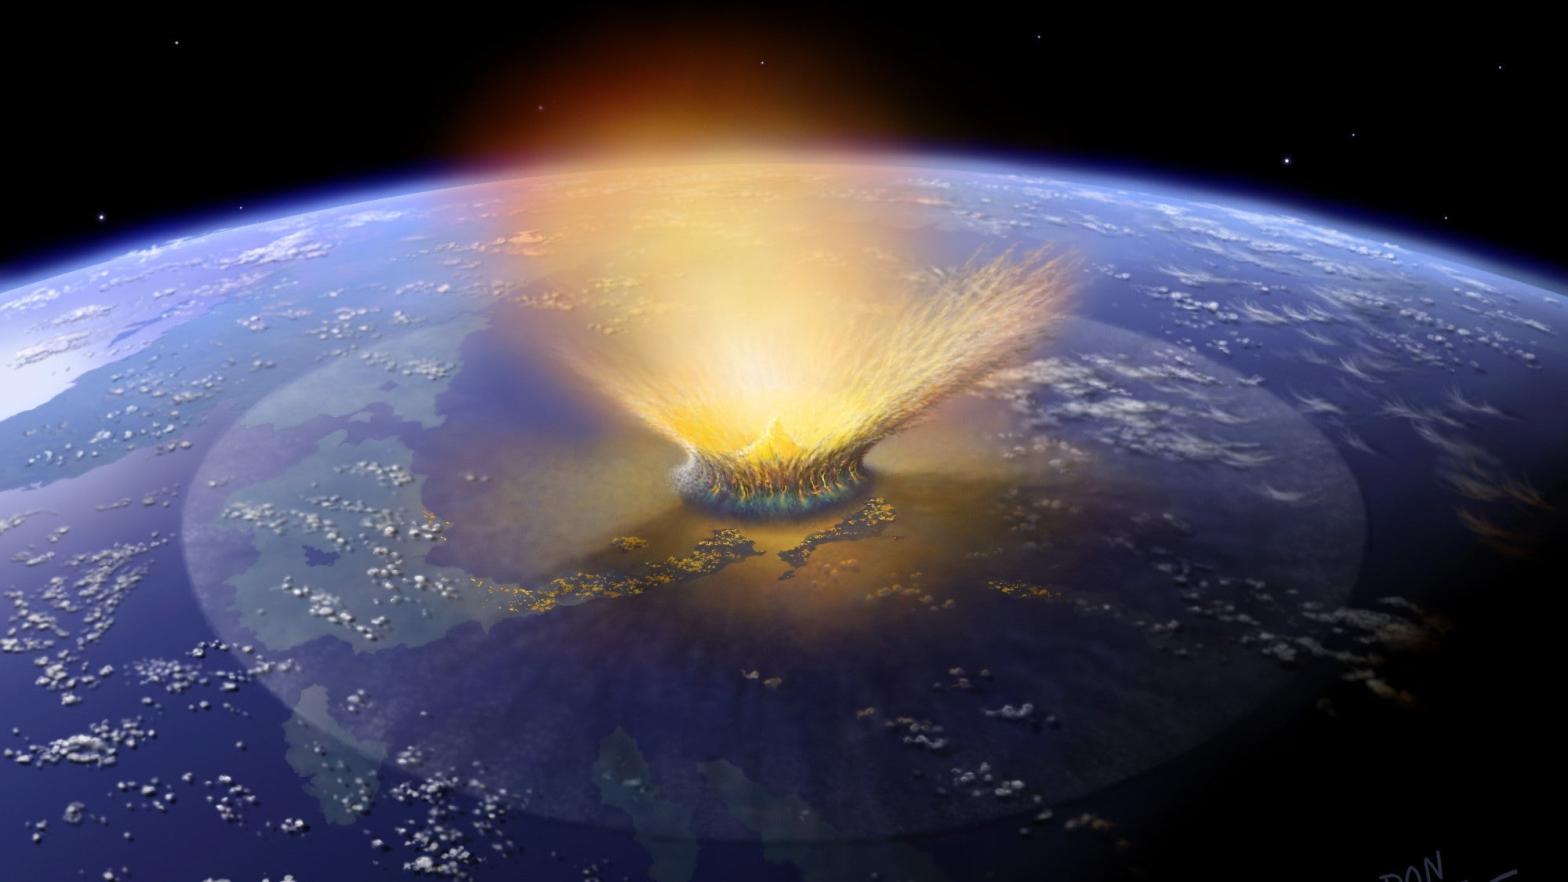 Artist's depiction of a large asteroid striking Earth. (Image: Don Davis/SWRI)